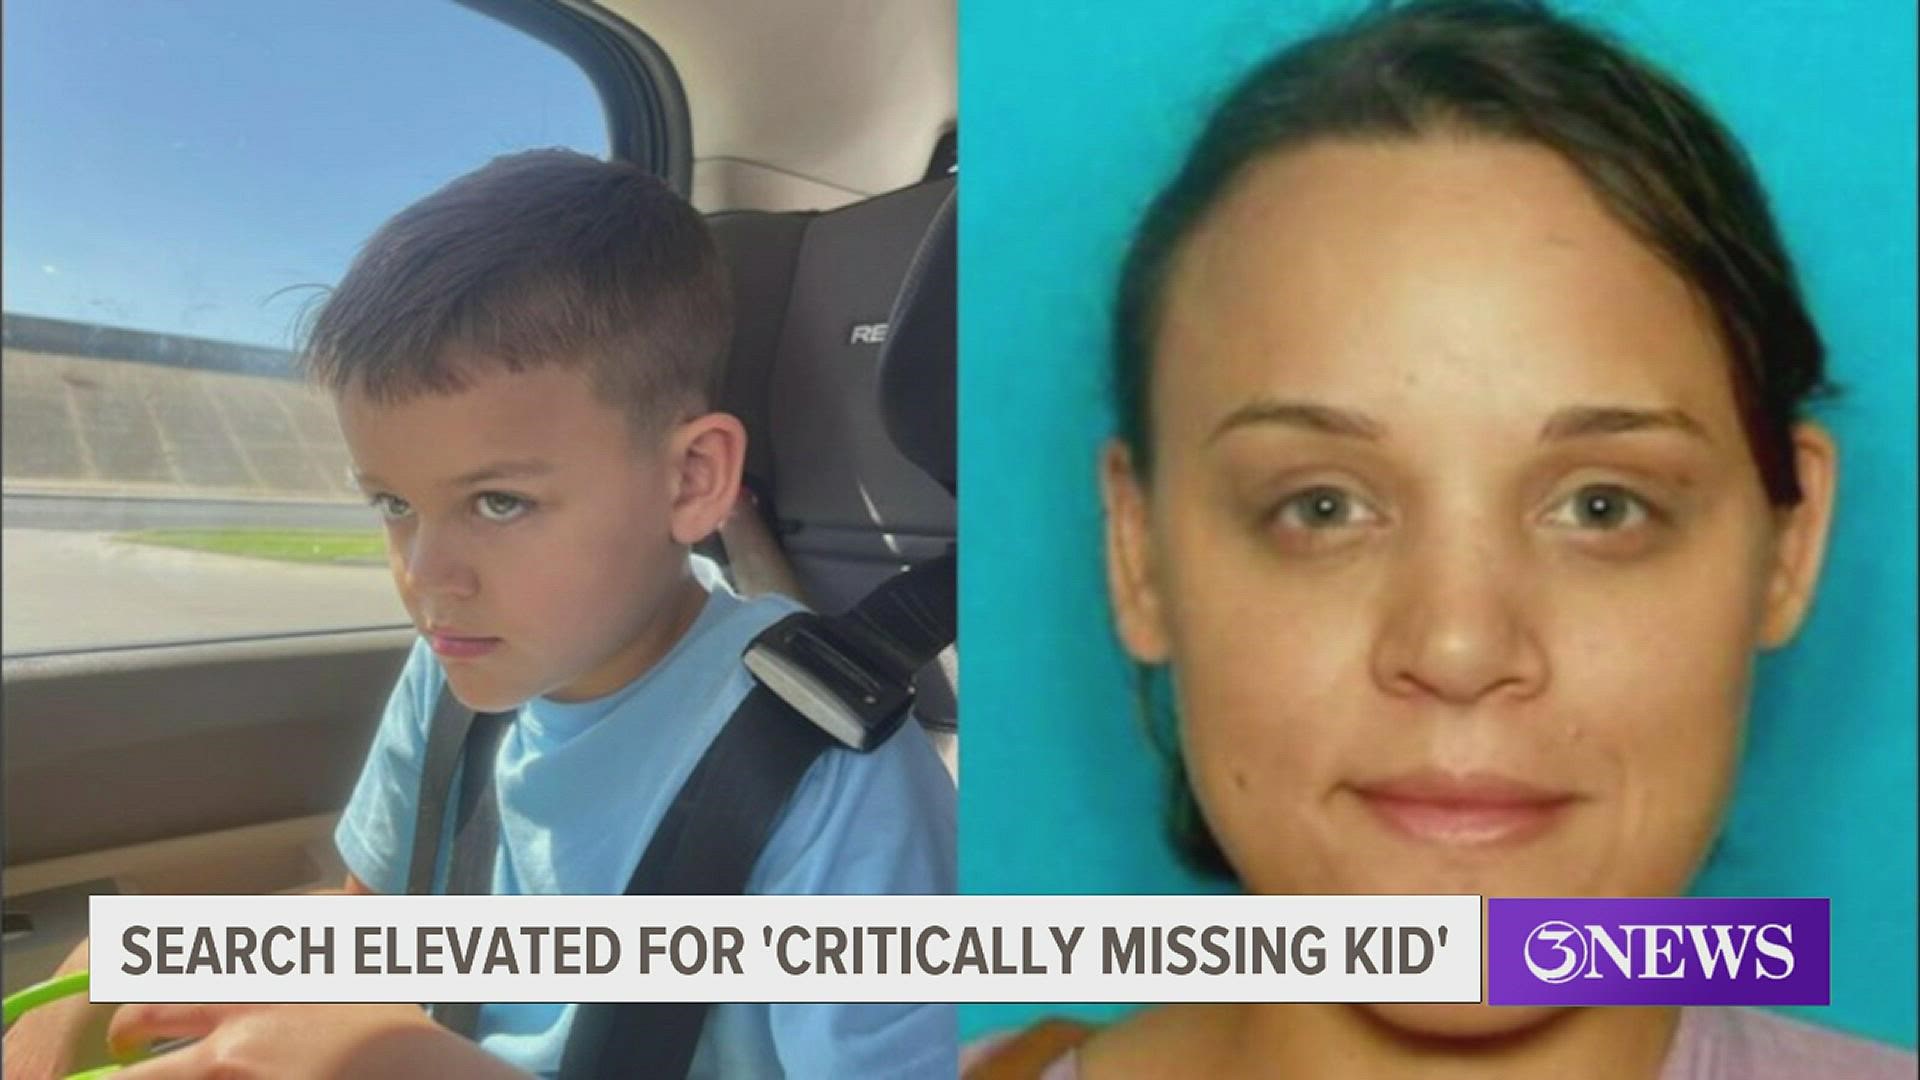 Officials say Edwin Buskirk is a special needs child who's mother does not have custody.